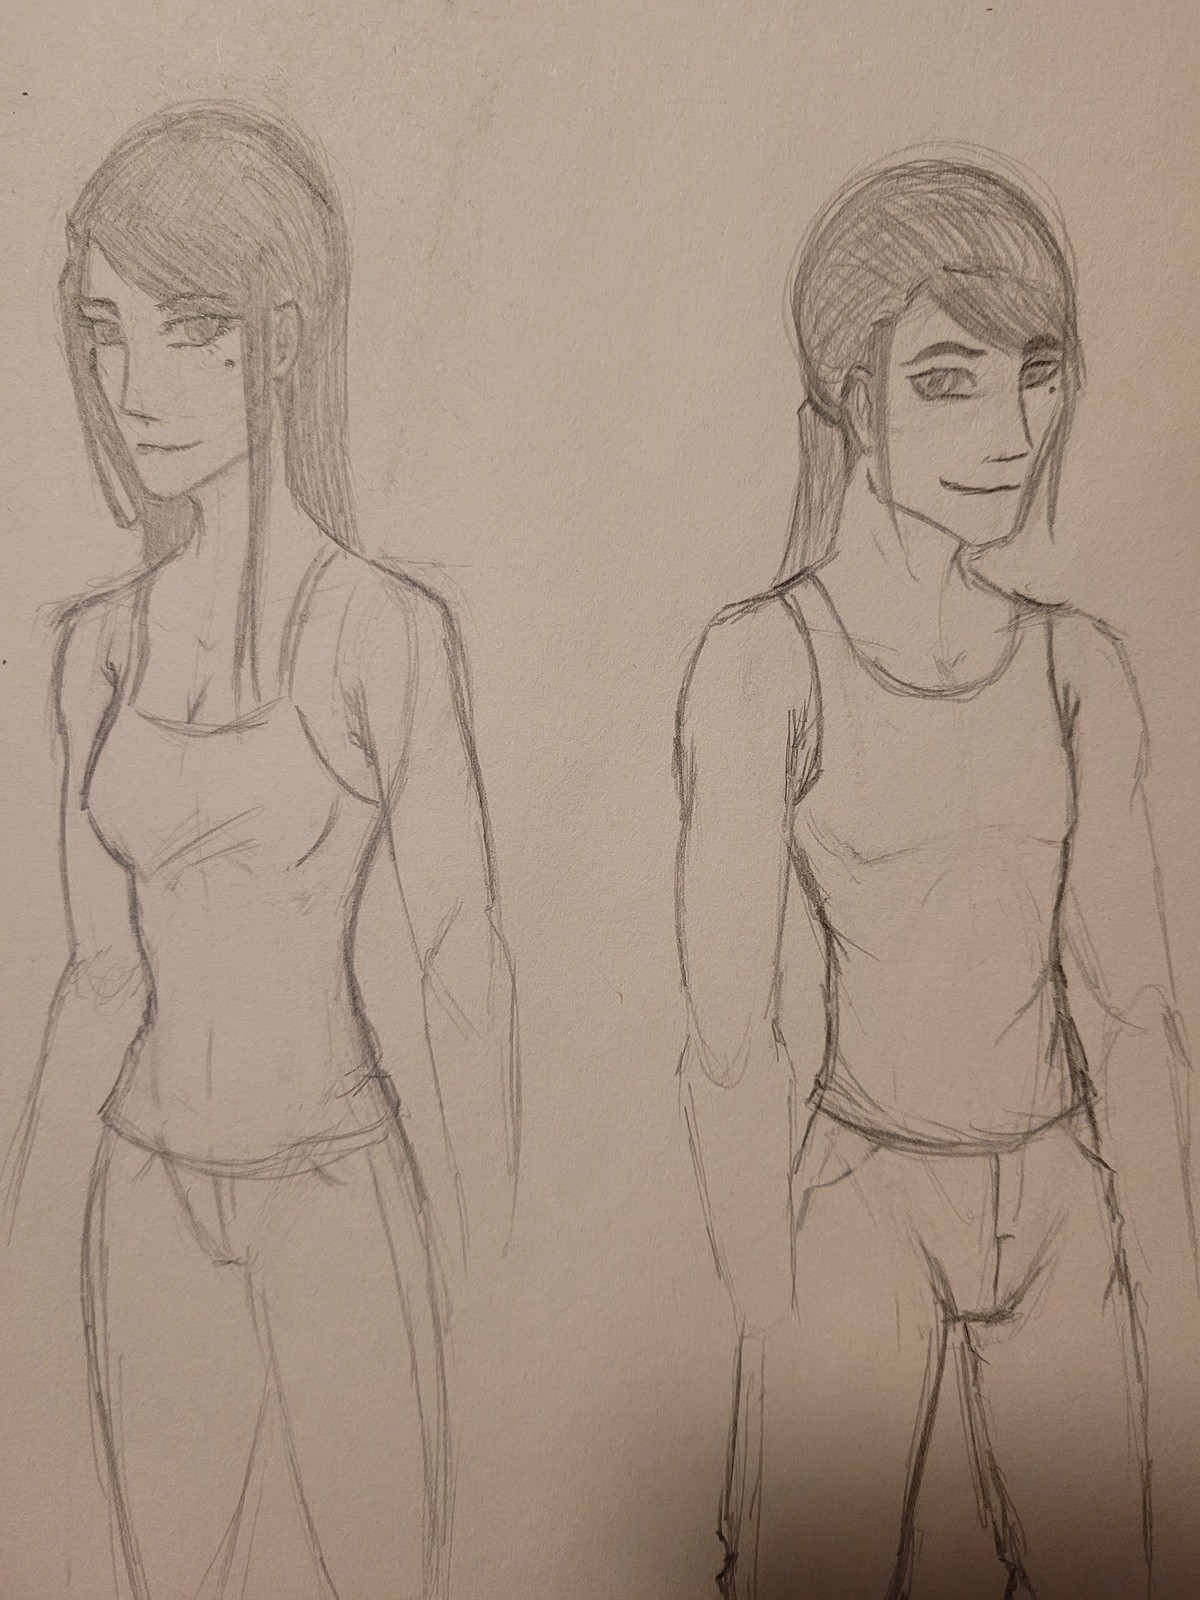 OC Genderbends. Doodled some genderbends of my OCs, nothing polished this time, apologies for lack of quality control. First one is my OC Ada, second is my D&am